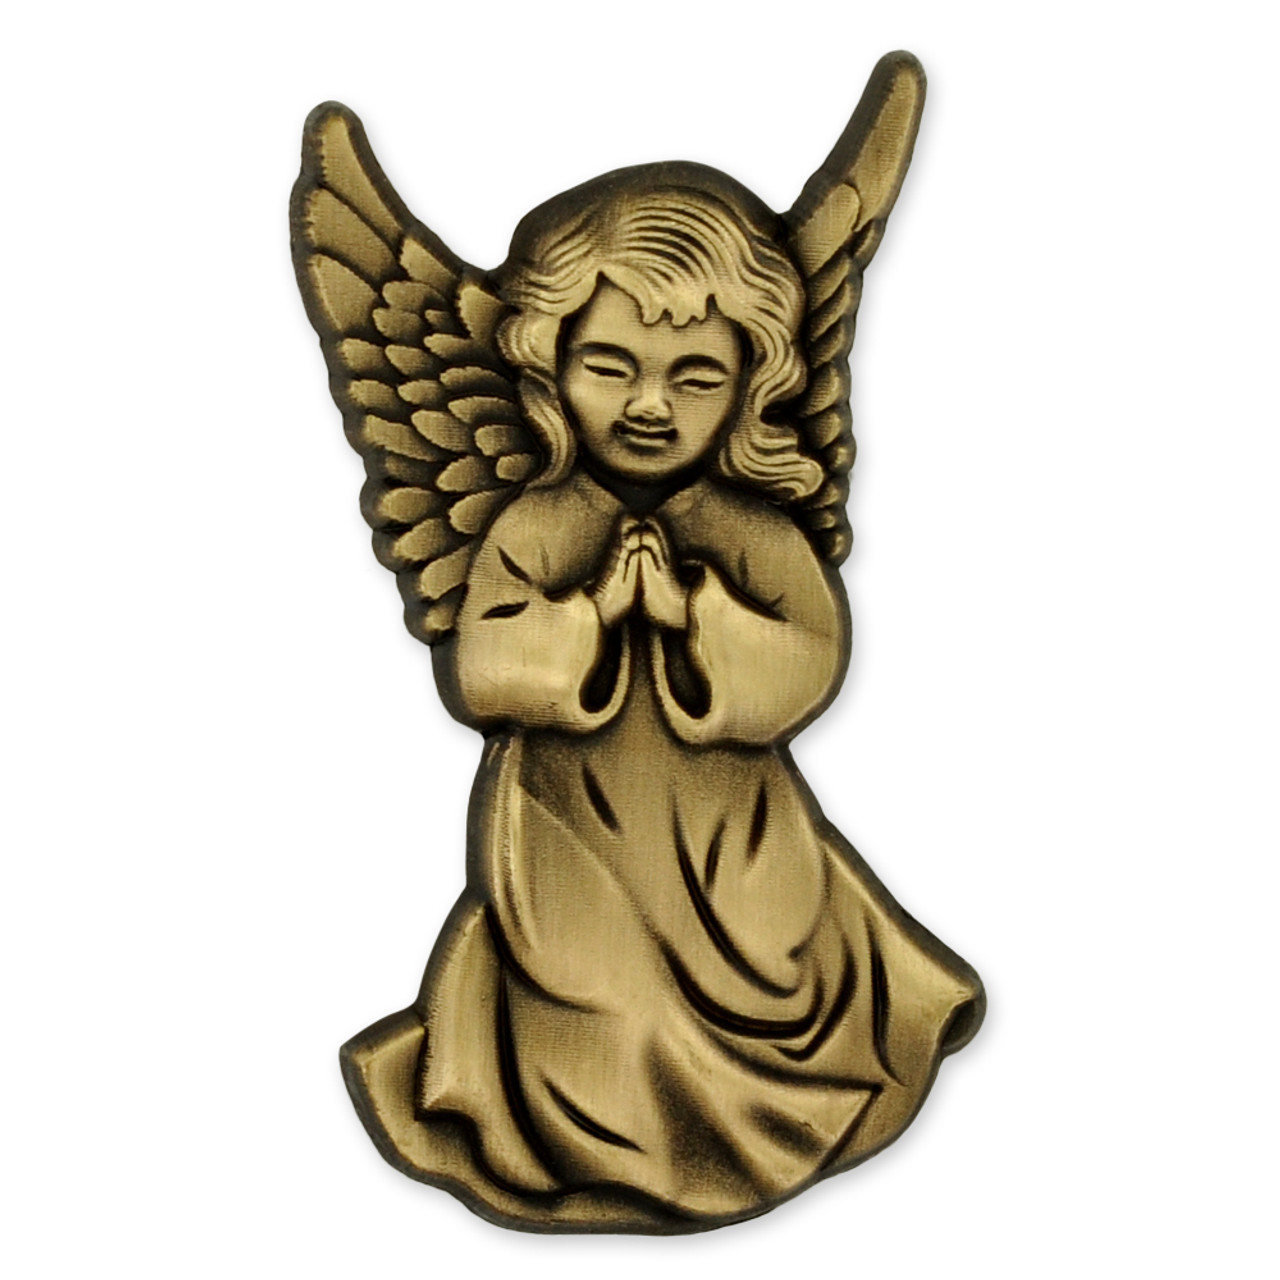 Custom Lapel Pins For Churches & Religious Organizations - Volunteer Gifts